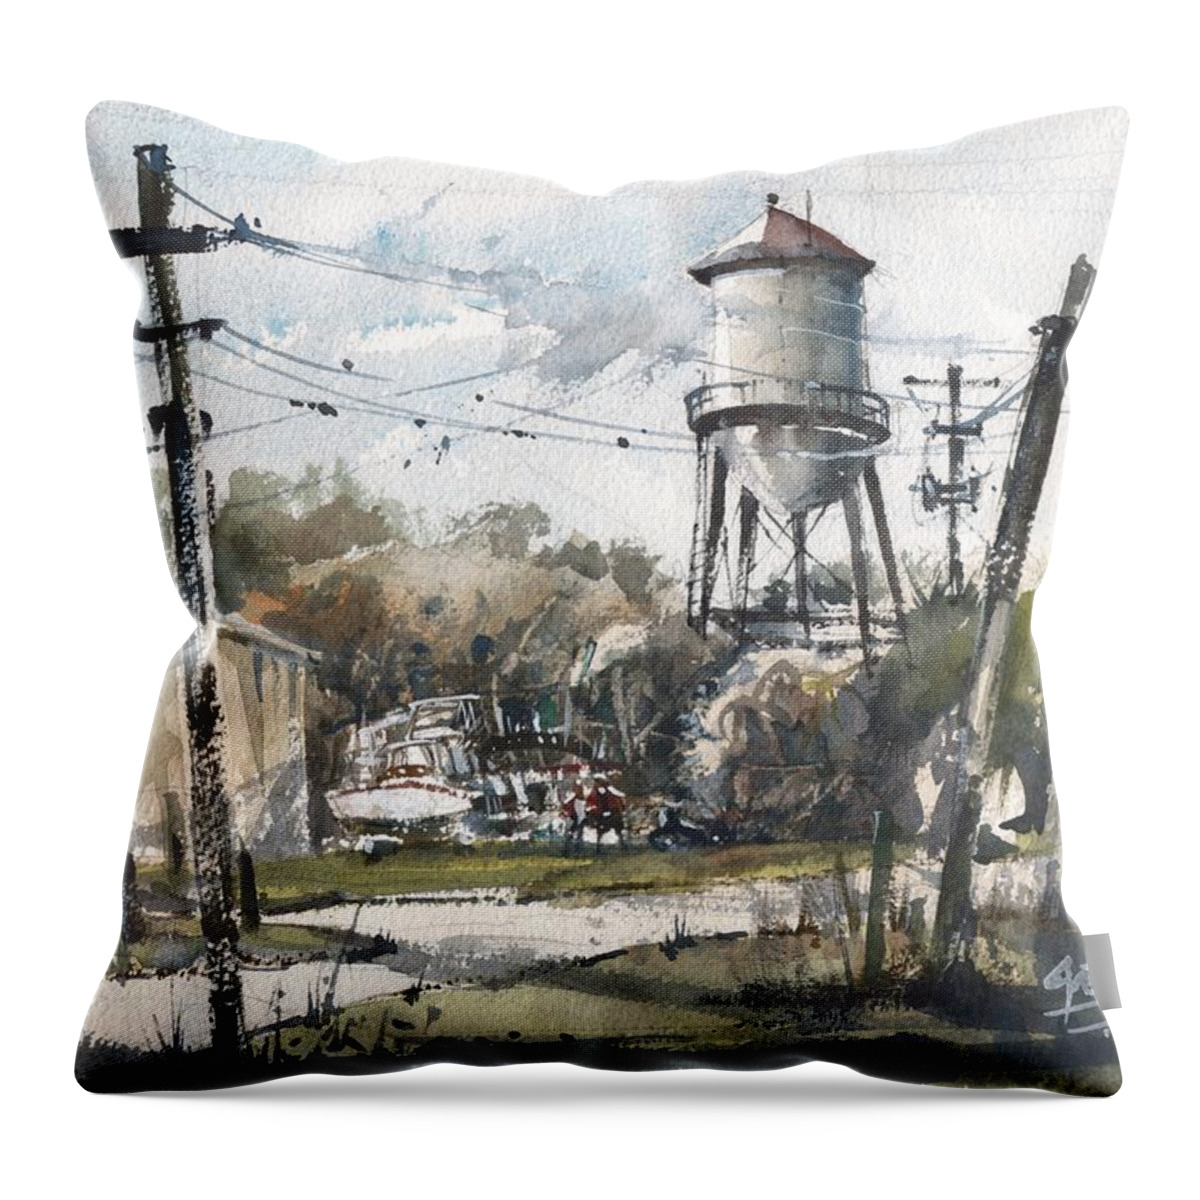 Tampa Throw Pillow featuring the painting Tampa Tower Too by Gaston McKenzie